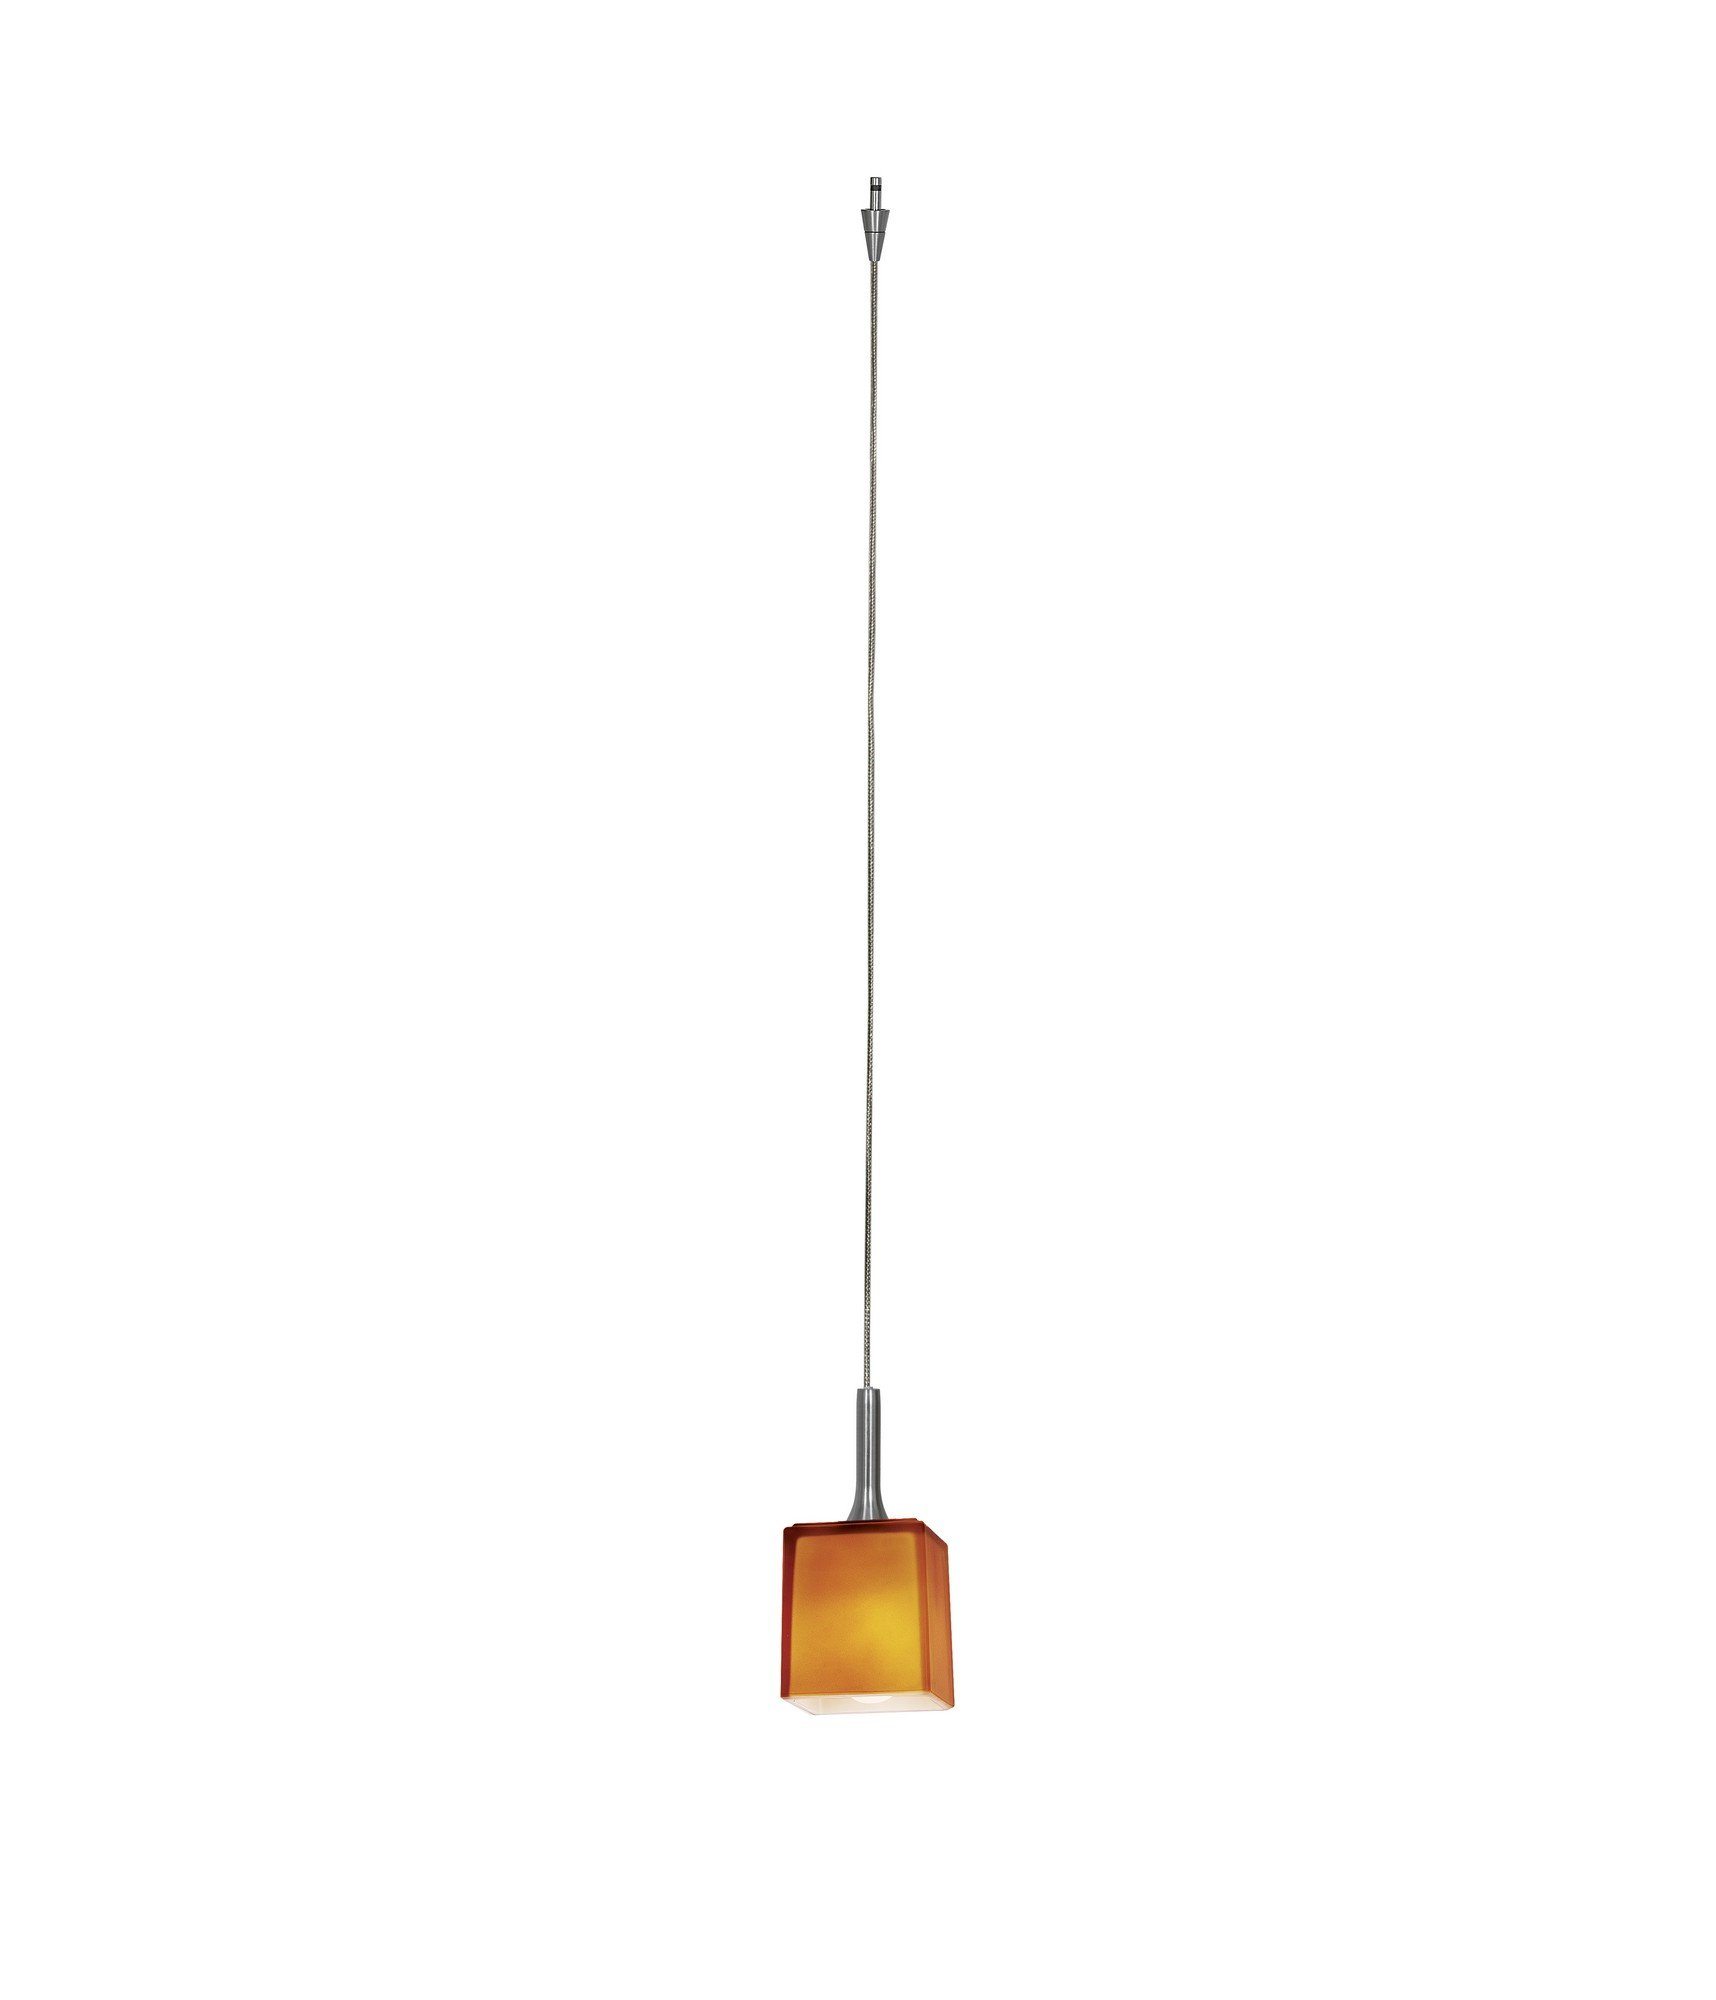 Omega Herme's Low Voltage Pendant excluding Mono-Pod - Bronze Ceiling Access Lighting 